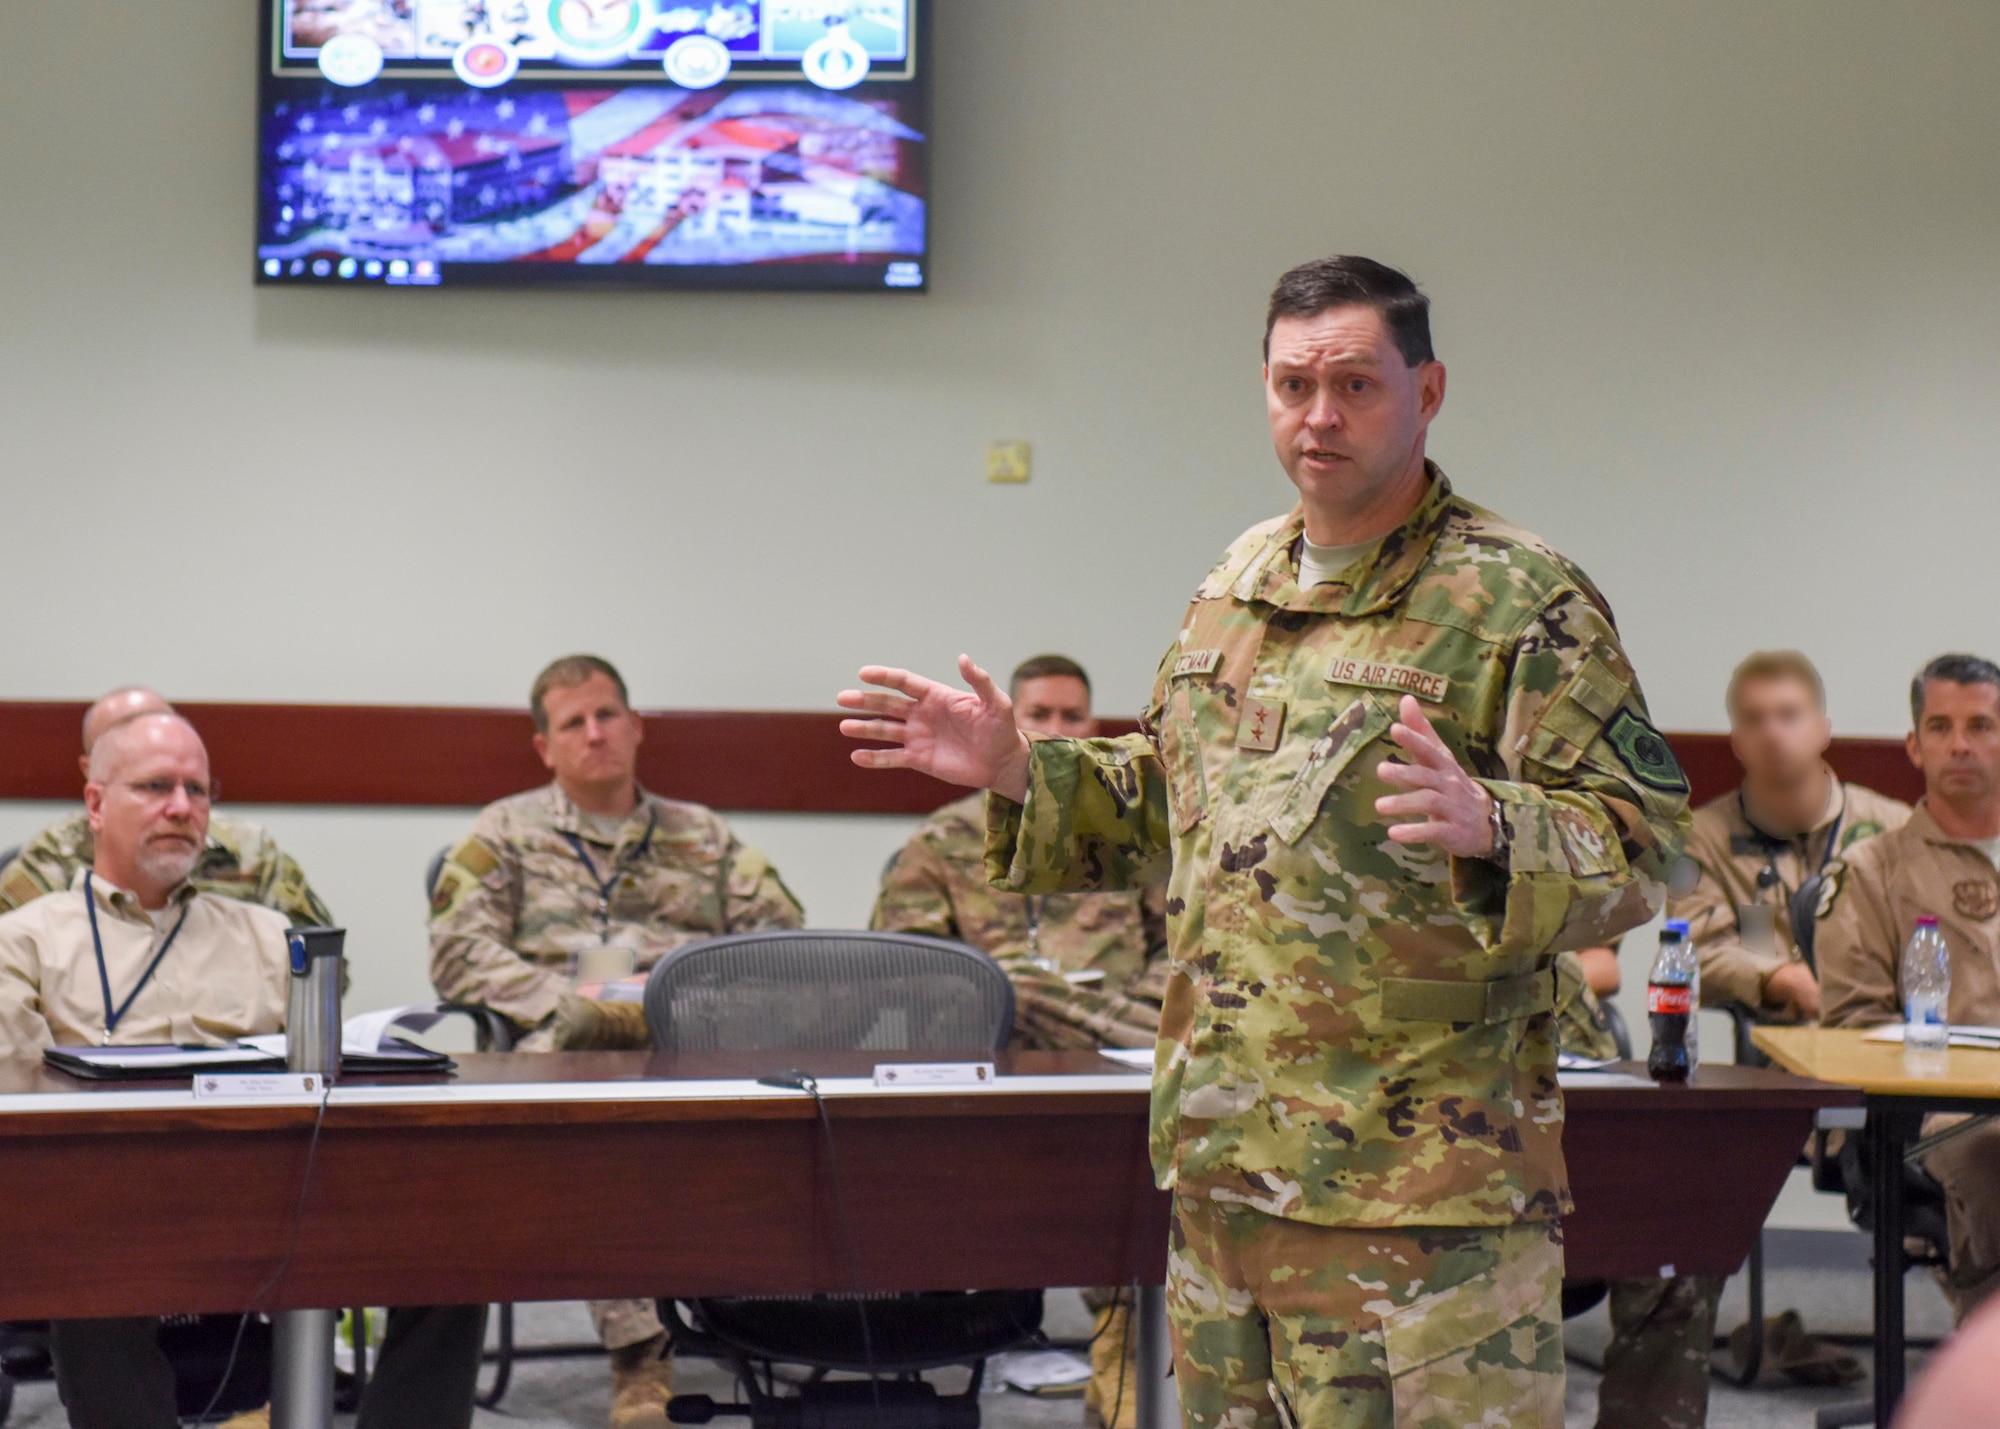 U.S. Air Force Maj. Gen. B. Chance Saltzman, U.S. Air Forces Central Command deputy Combined Force Air Component Commander, gives a speech during the fall AFCENT Chiefs of Safety conference at Al Udeid Air Base, Qatar, Sept. 10, 2019.